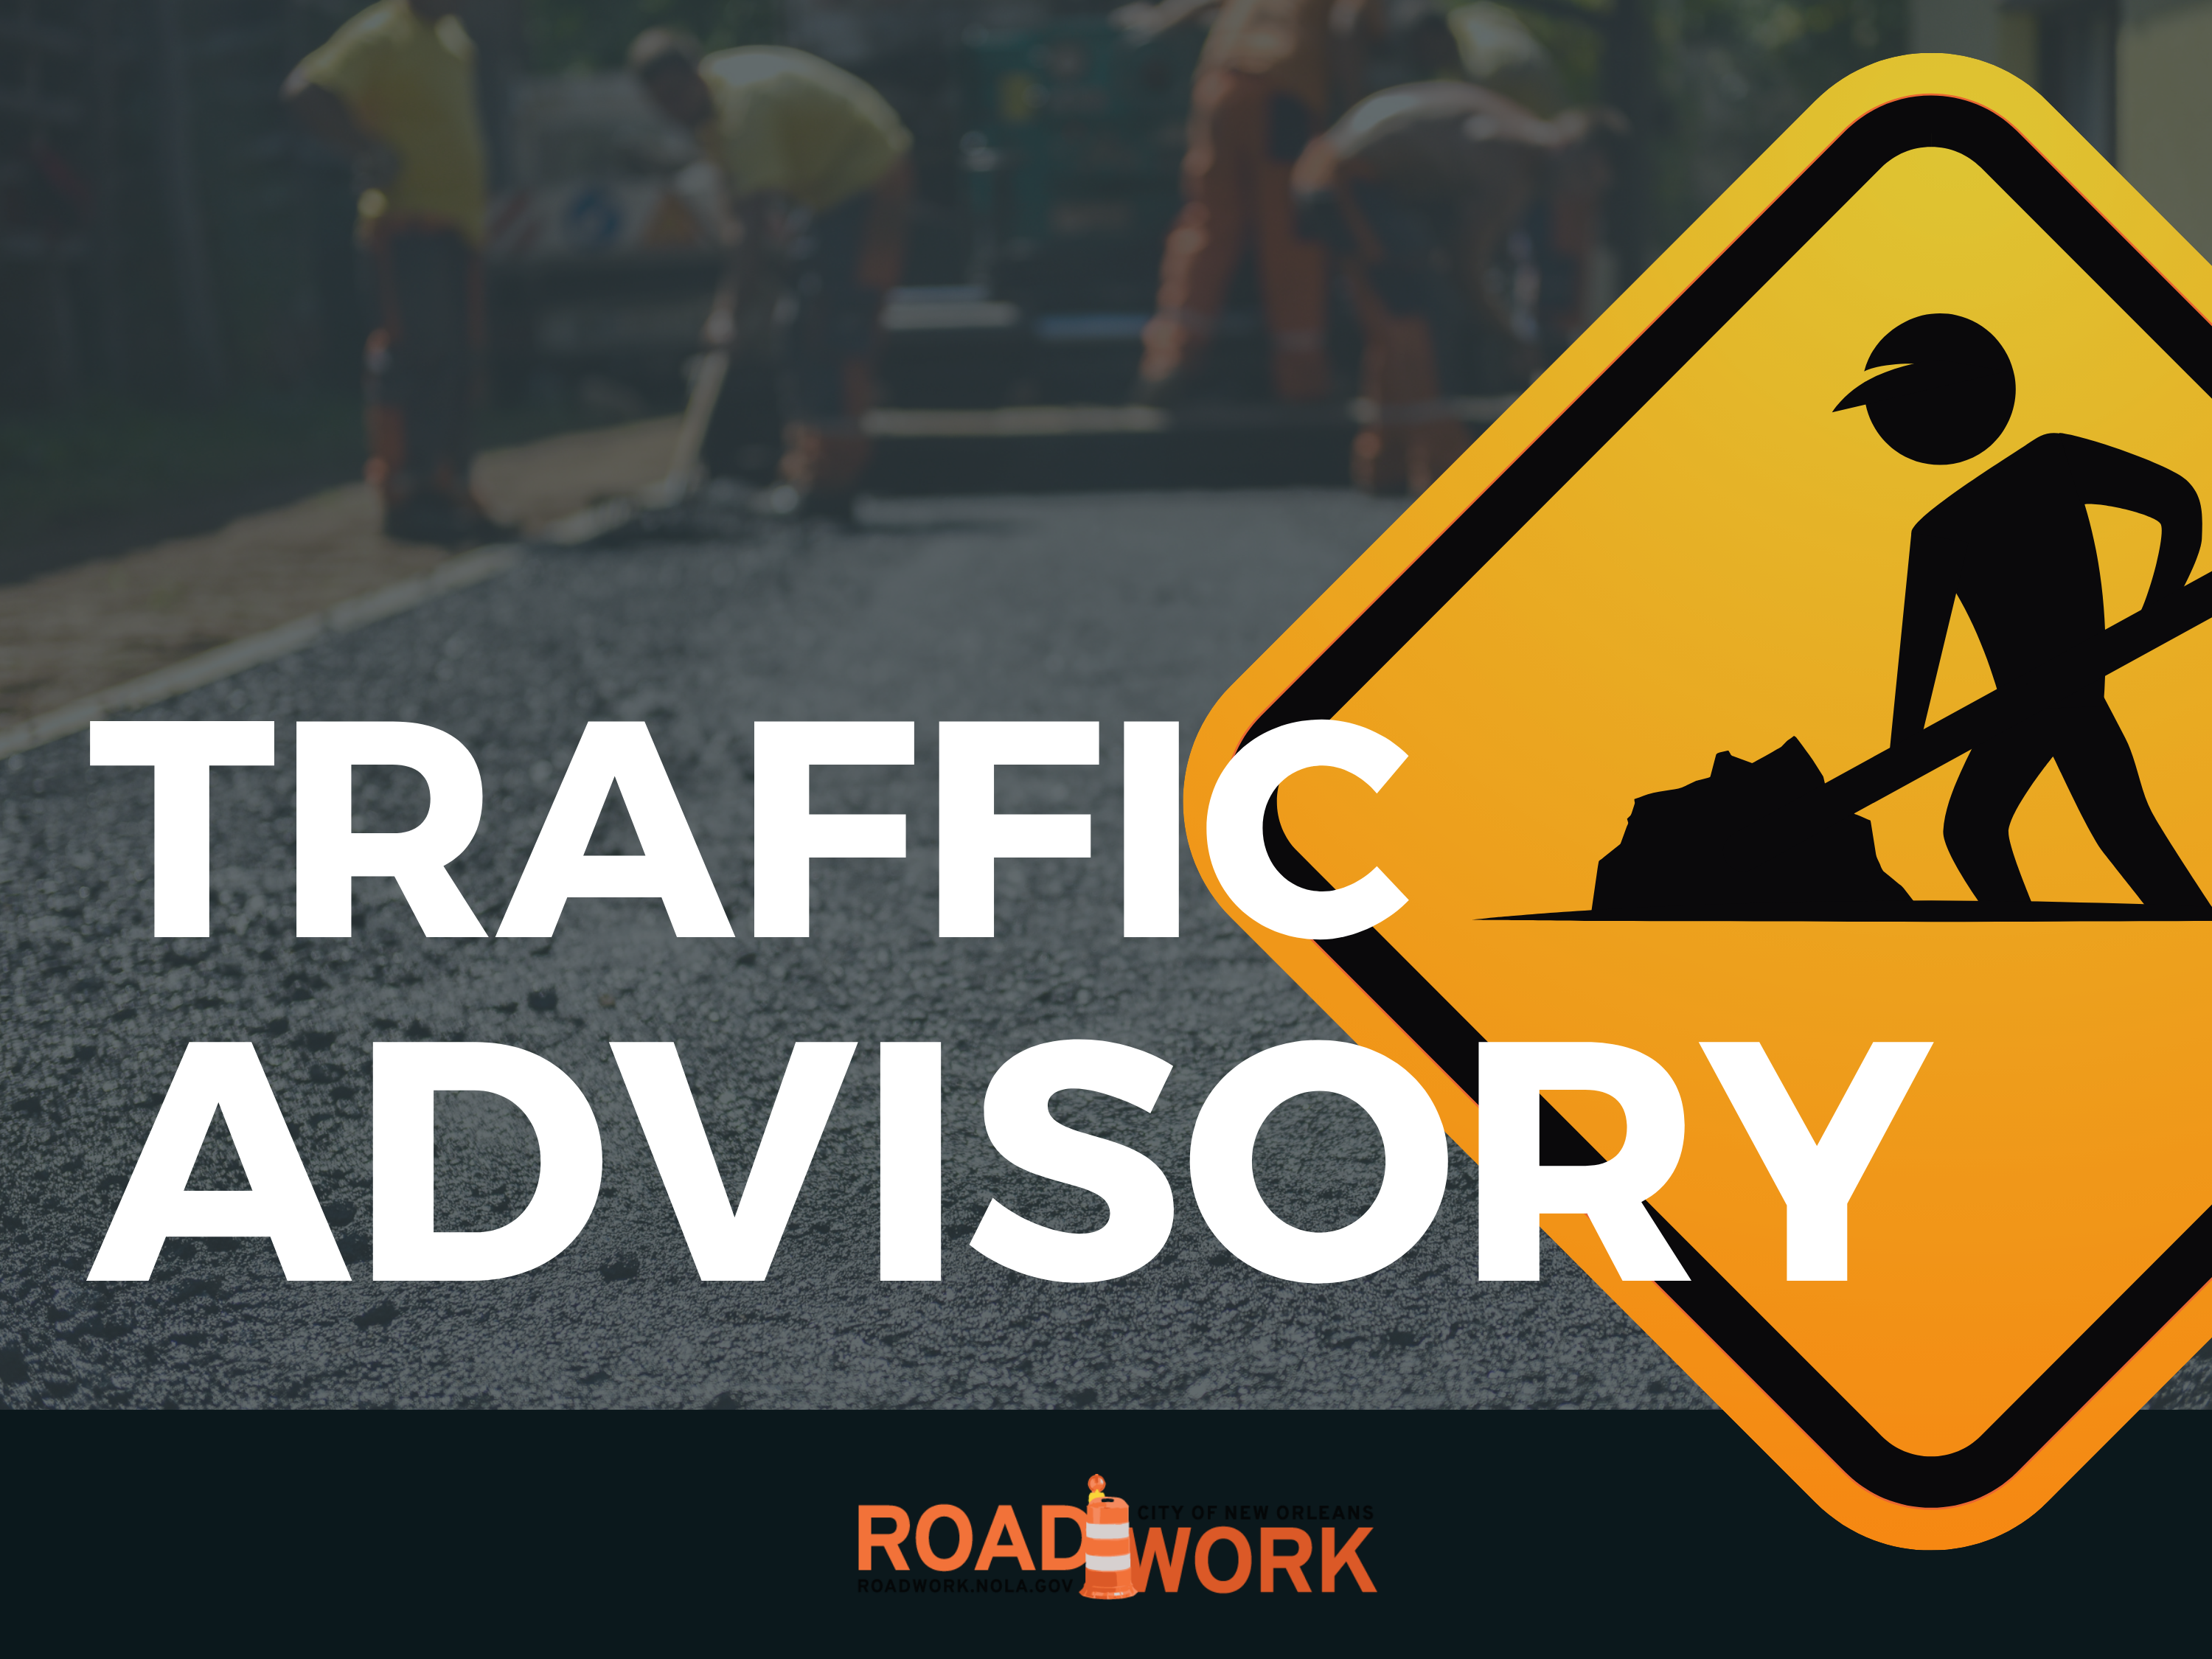 Traffic Advisory: Temporary Traffic Modification along Sage Street, Dahlia Walk and Peoples Avenue in Edgewood Park Subdivision